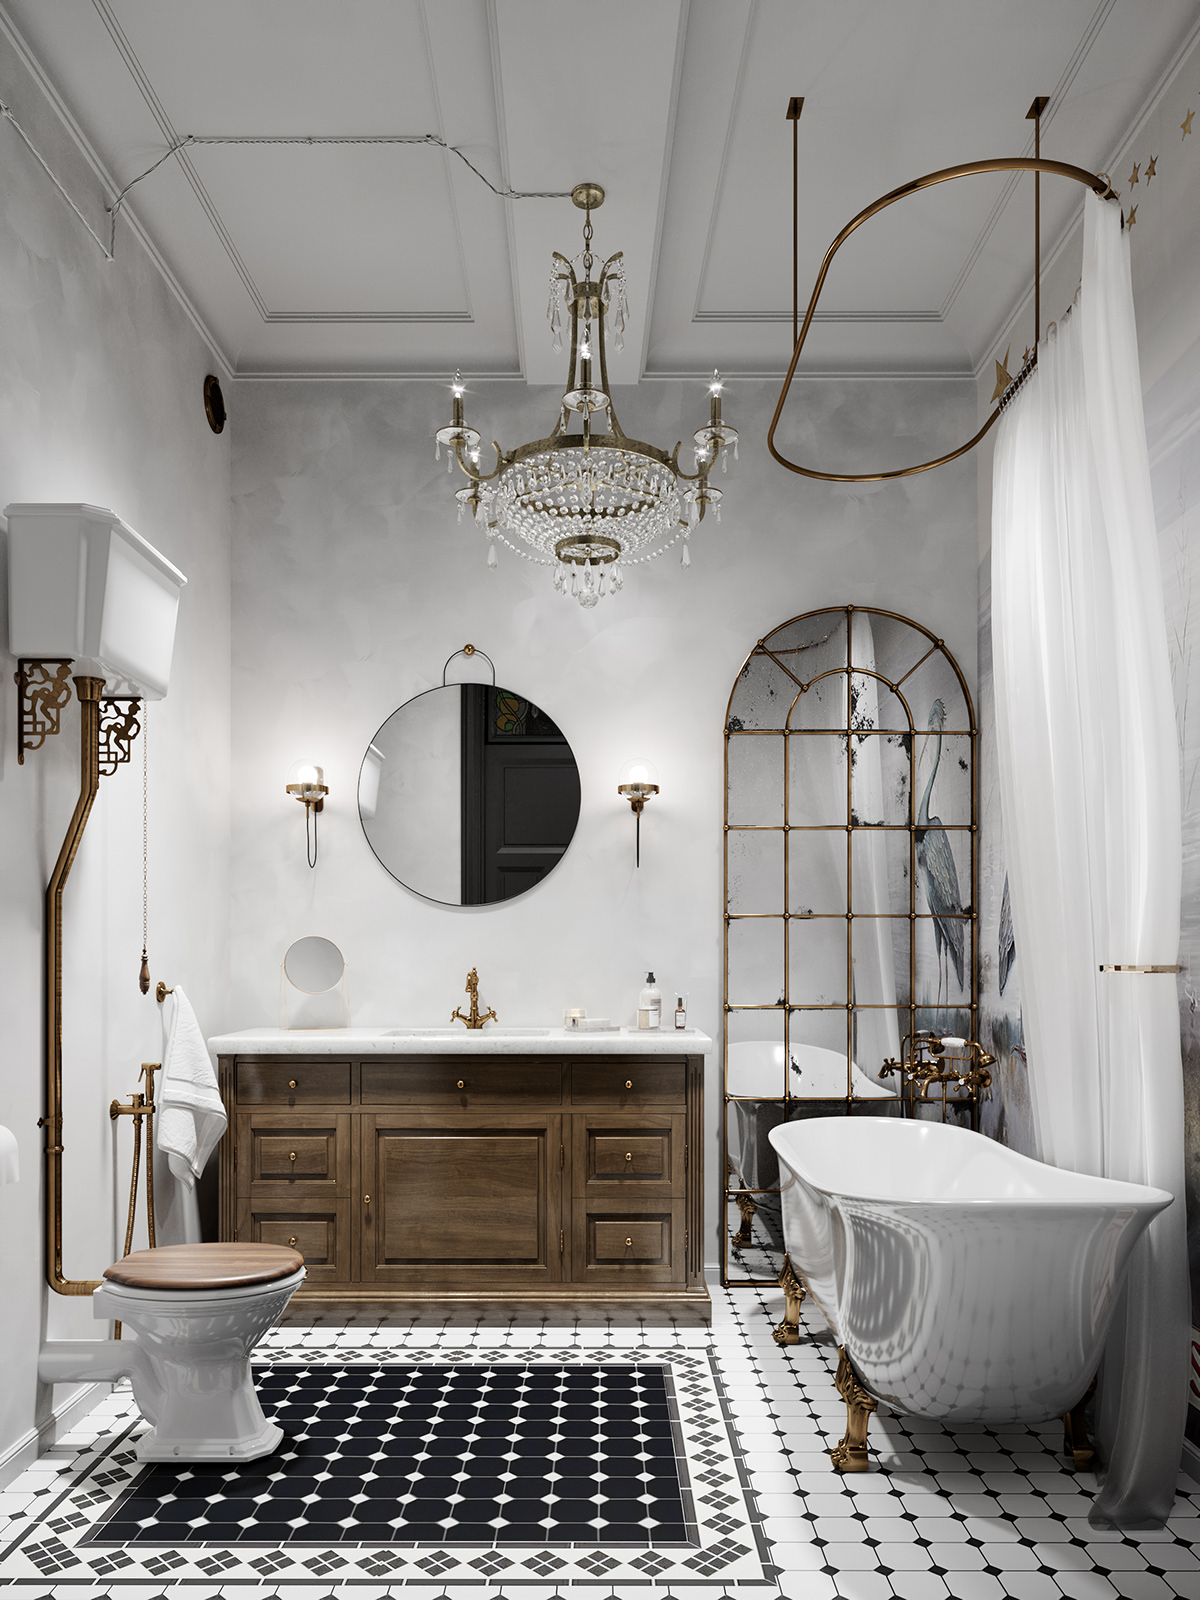 A traditional and glamorous bathroom is created with a classic ceramic tile background, black and white motifs, and brass accessories.